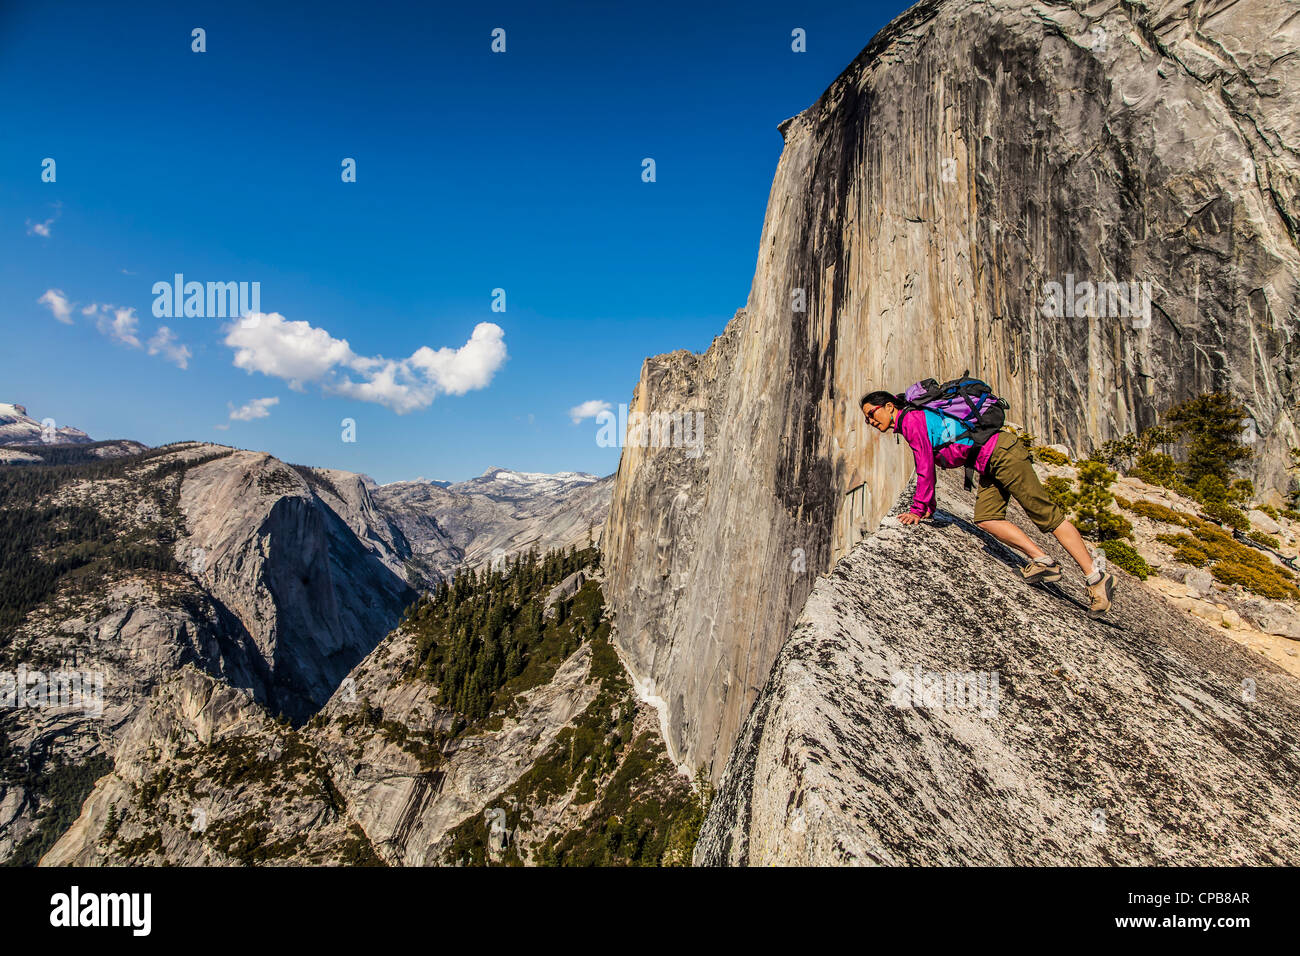 Climber peers over the edge of an abyss in Yosemite National Park. Stock Photo